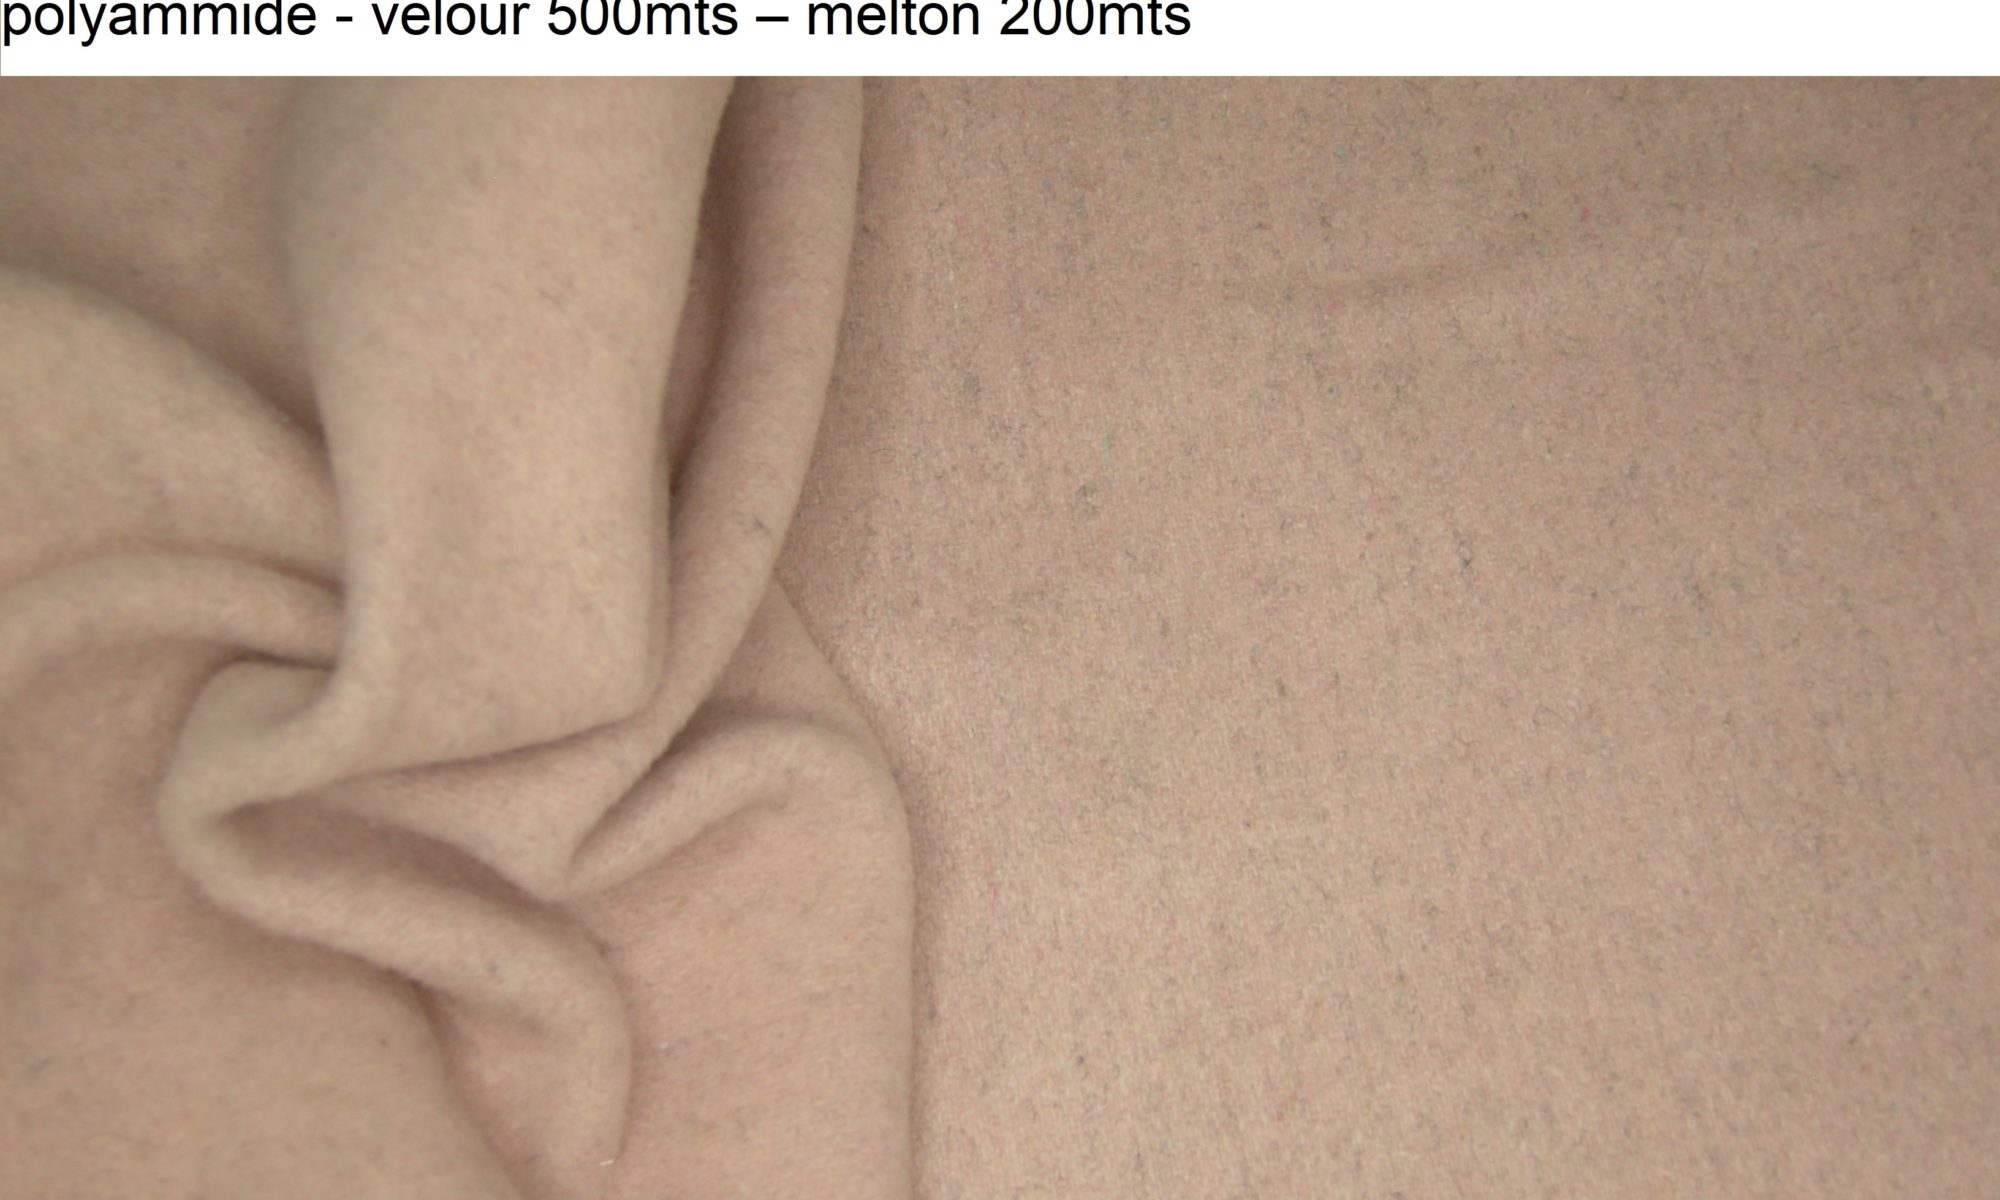 7747 wool blend pink melange coat fabric WIDTH cm155 WEIGHT gr540 - gr348 square meter - COMPOSITION 30 wool 30 acrylic 30 polyester 10 polyammide - velour 500mts – melton 200mts